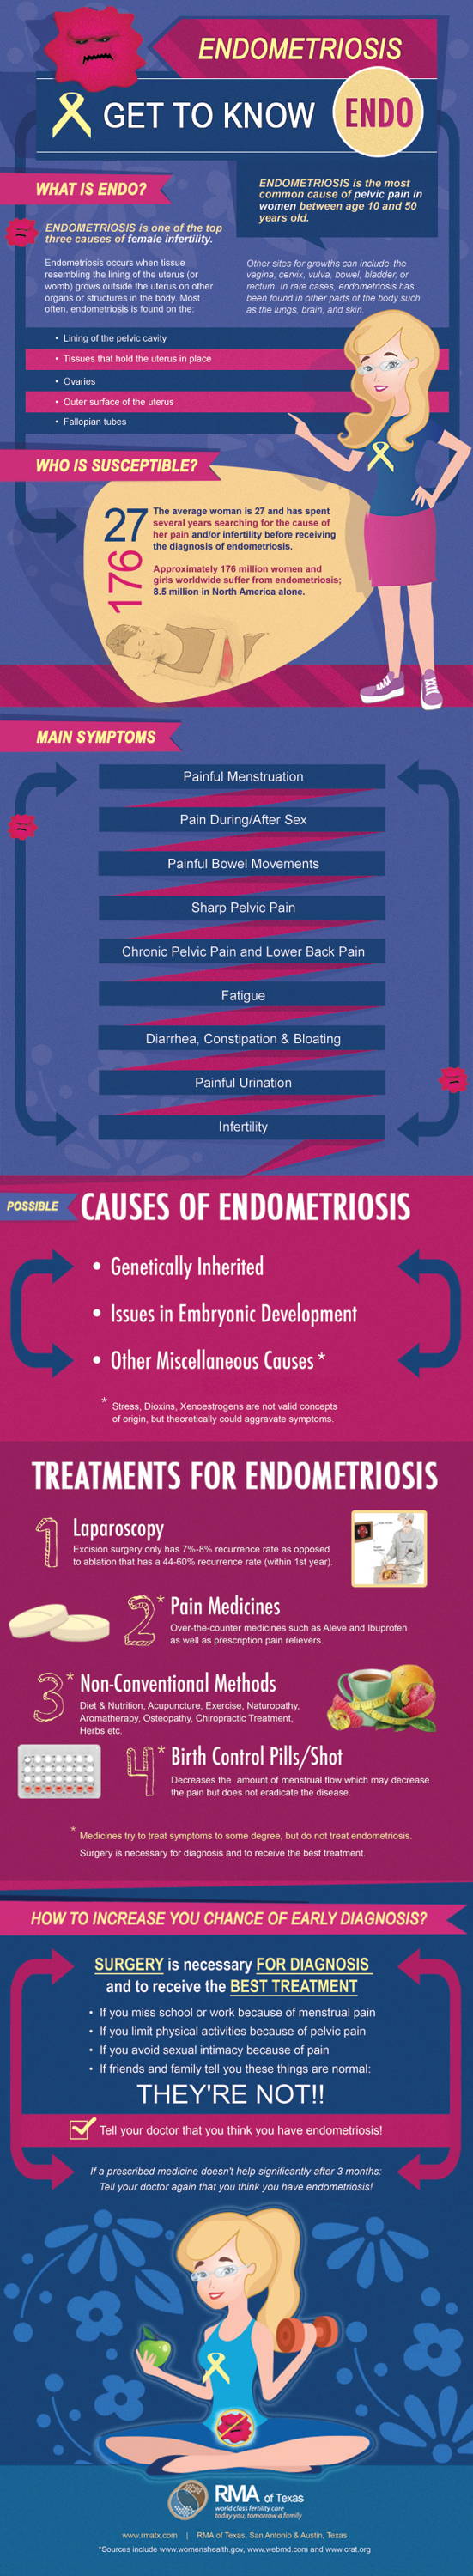 Infographic information about Endometriosis